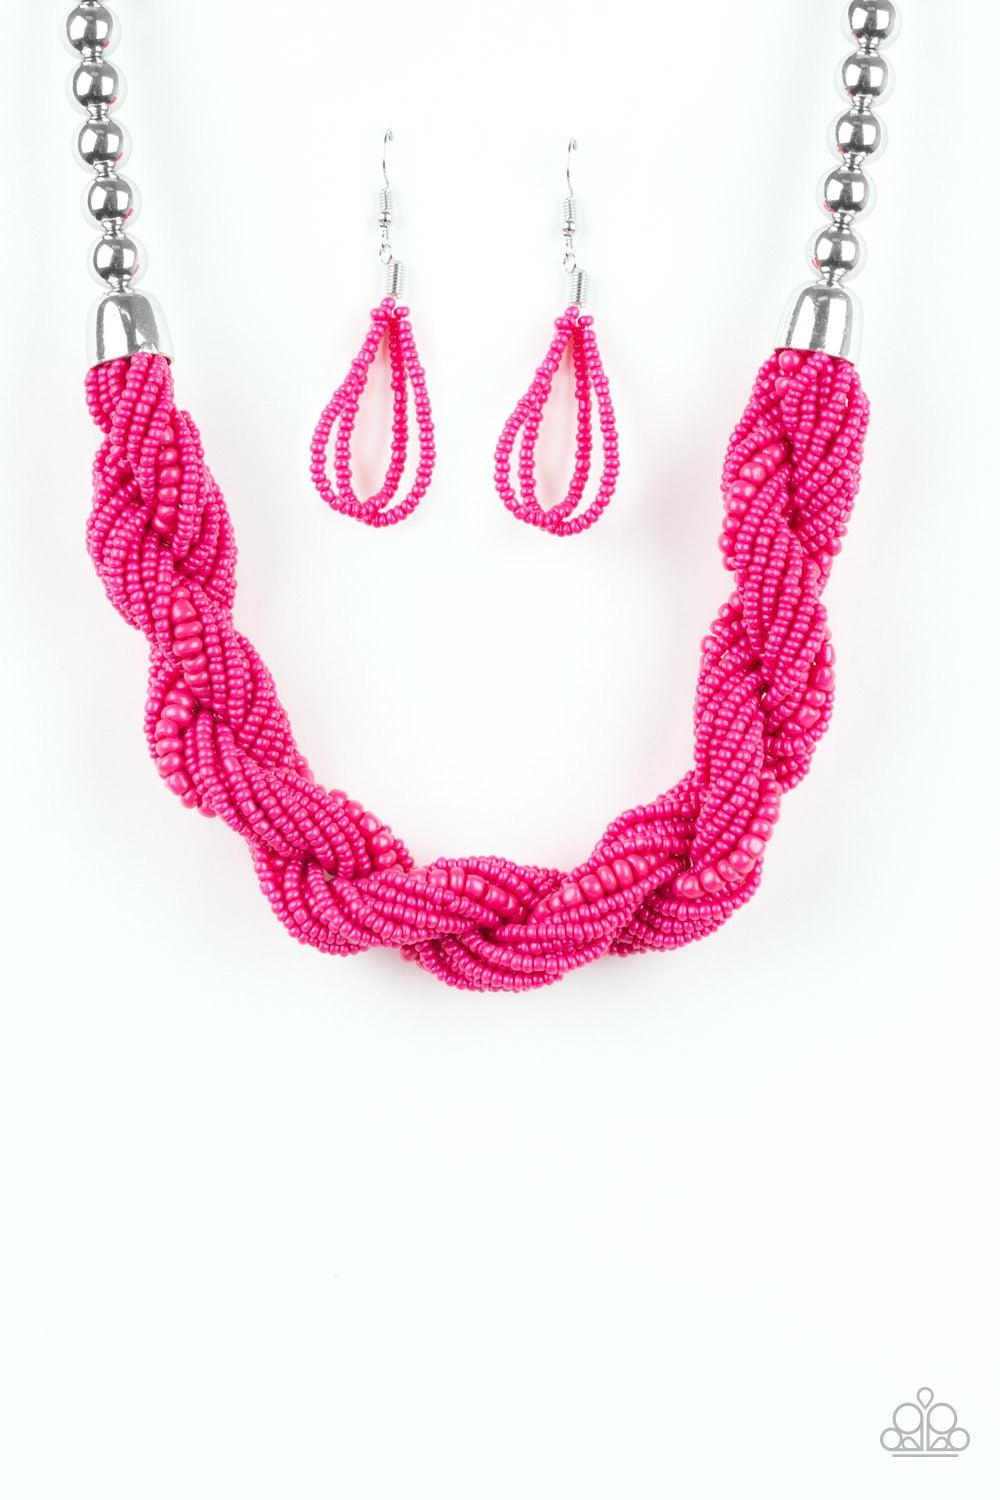 Paparazzi Accessories Savannah Surfin - Pink Glistening silver beads give way to strands of twisting pink seed beads below the collar for a summery flair. Features an adjustable clasp closure.